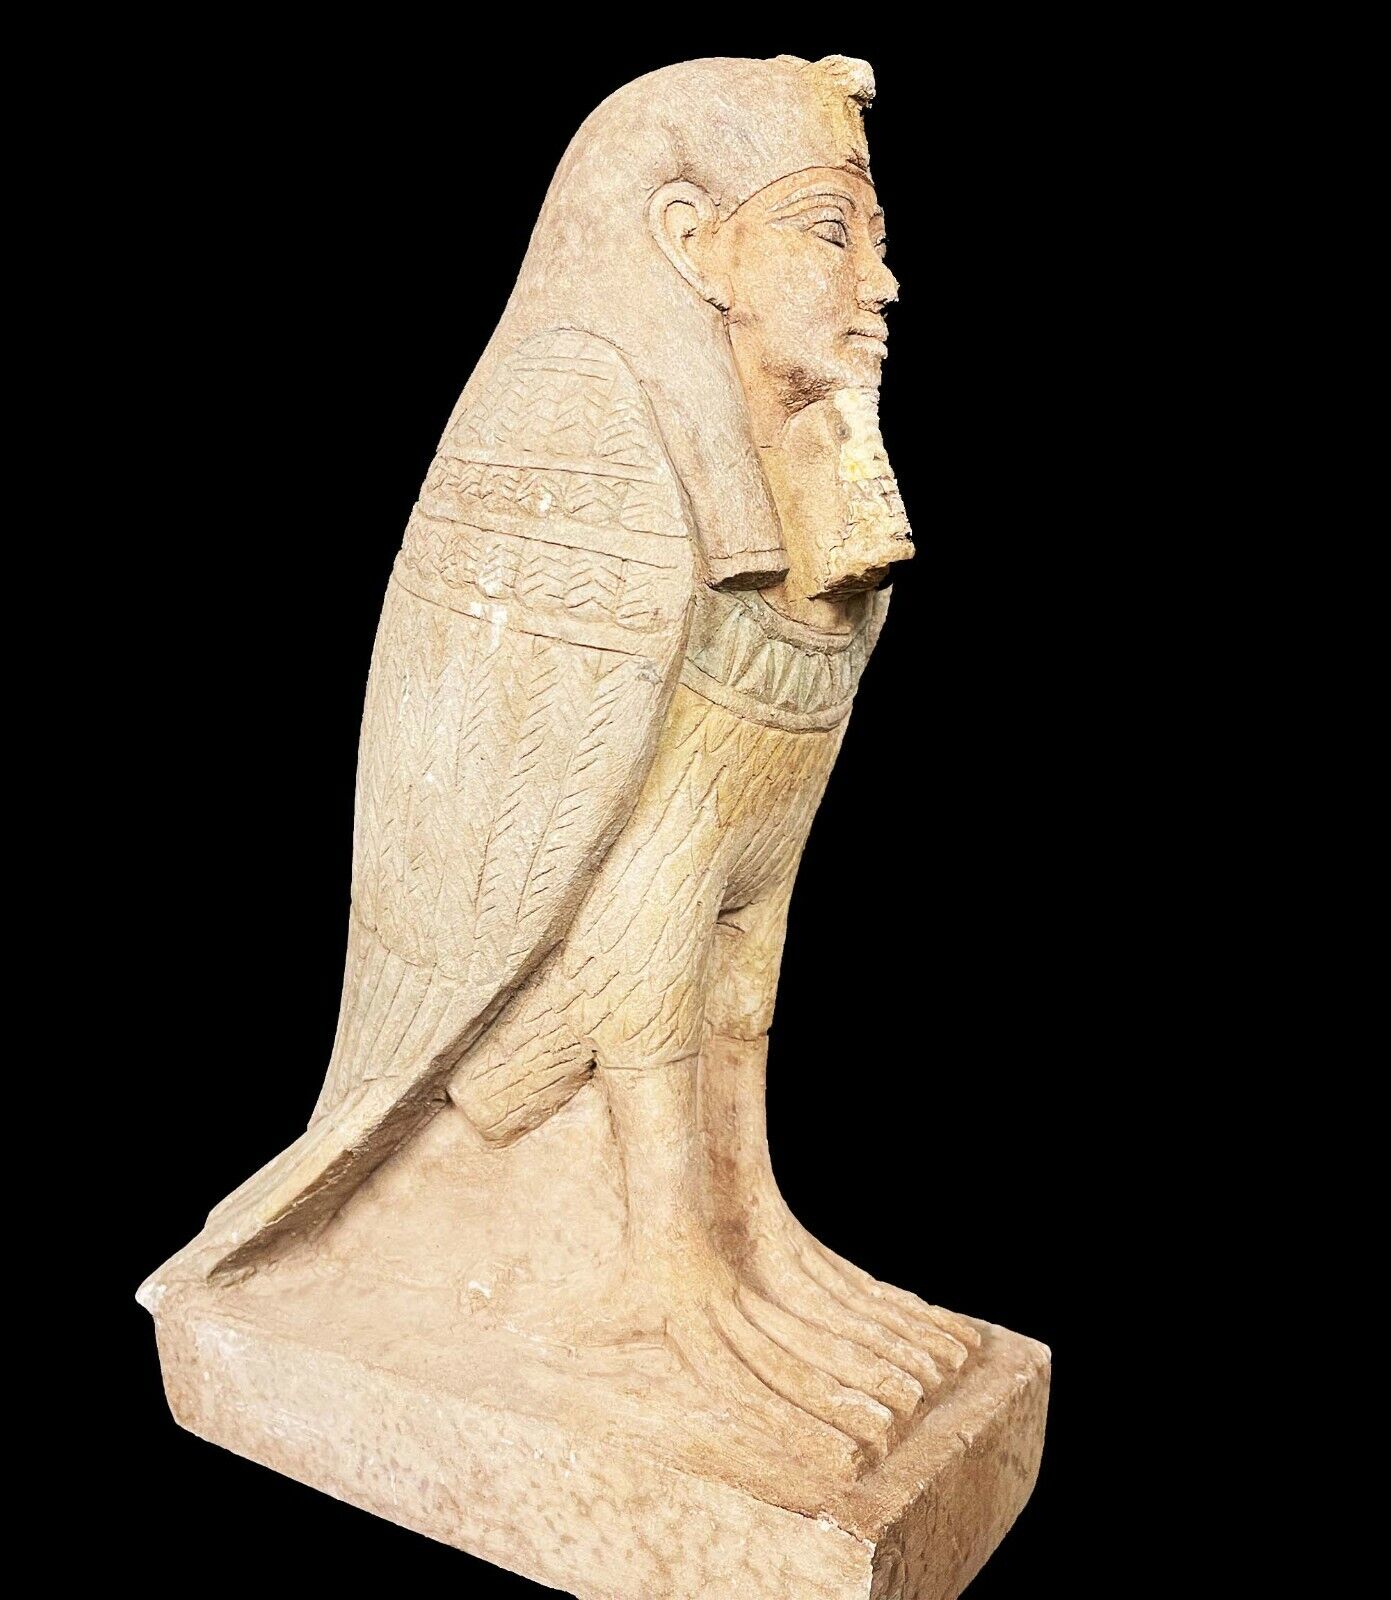 Old-fashioned BA-Bird with the Cobra for protection- god of pharaoh's soul